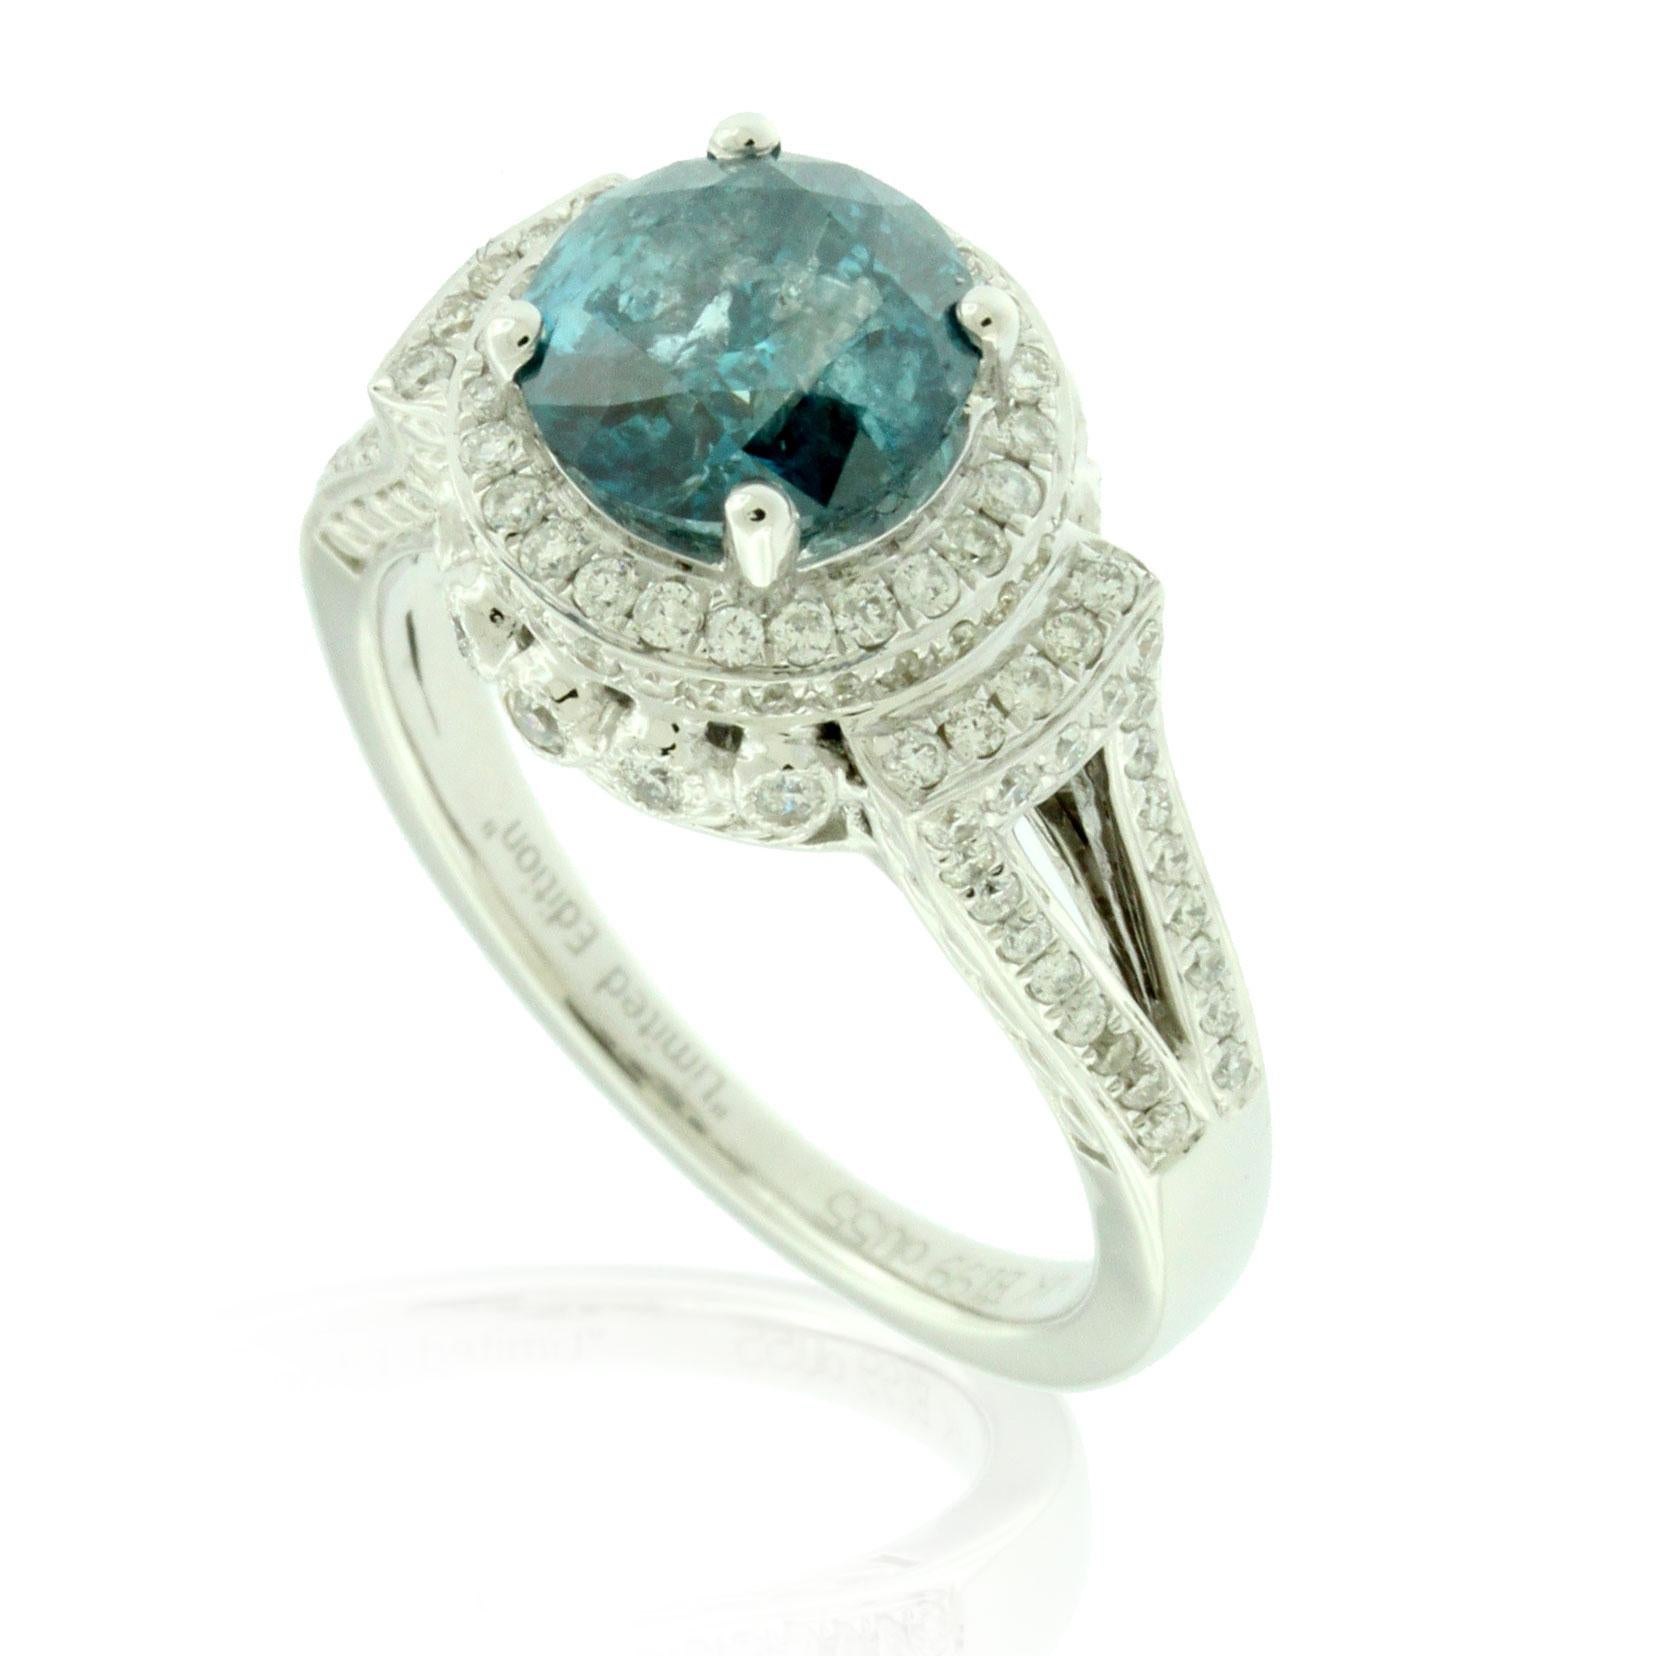 A rich blue diamond is prong-set atop this beautiful ring, surrounded by a halo of sparkling white diamonds. 

Center stone
Diamonds: One
Center cut: Round
Diamond weight: 1.64 carats
Color: Blue
Clarity: I1-I2
Setting: Prong
Side stones
Diamonds: